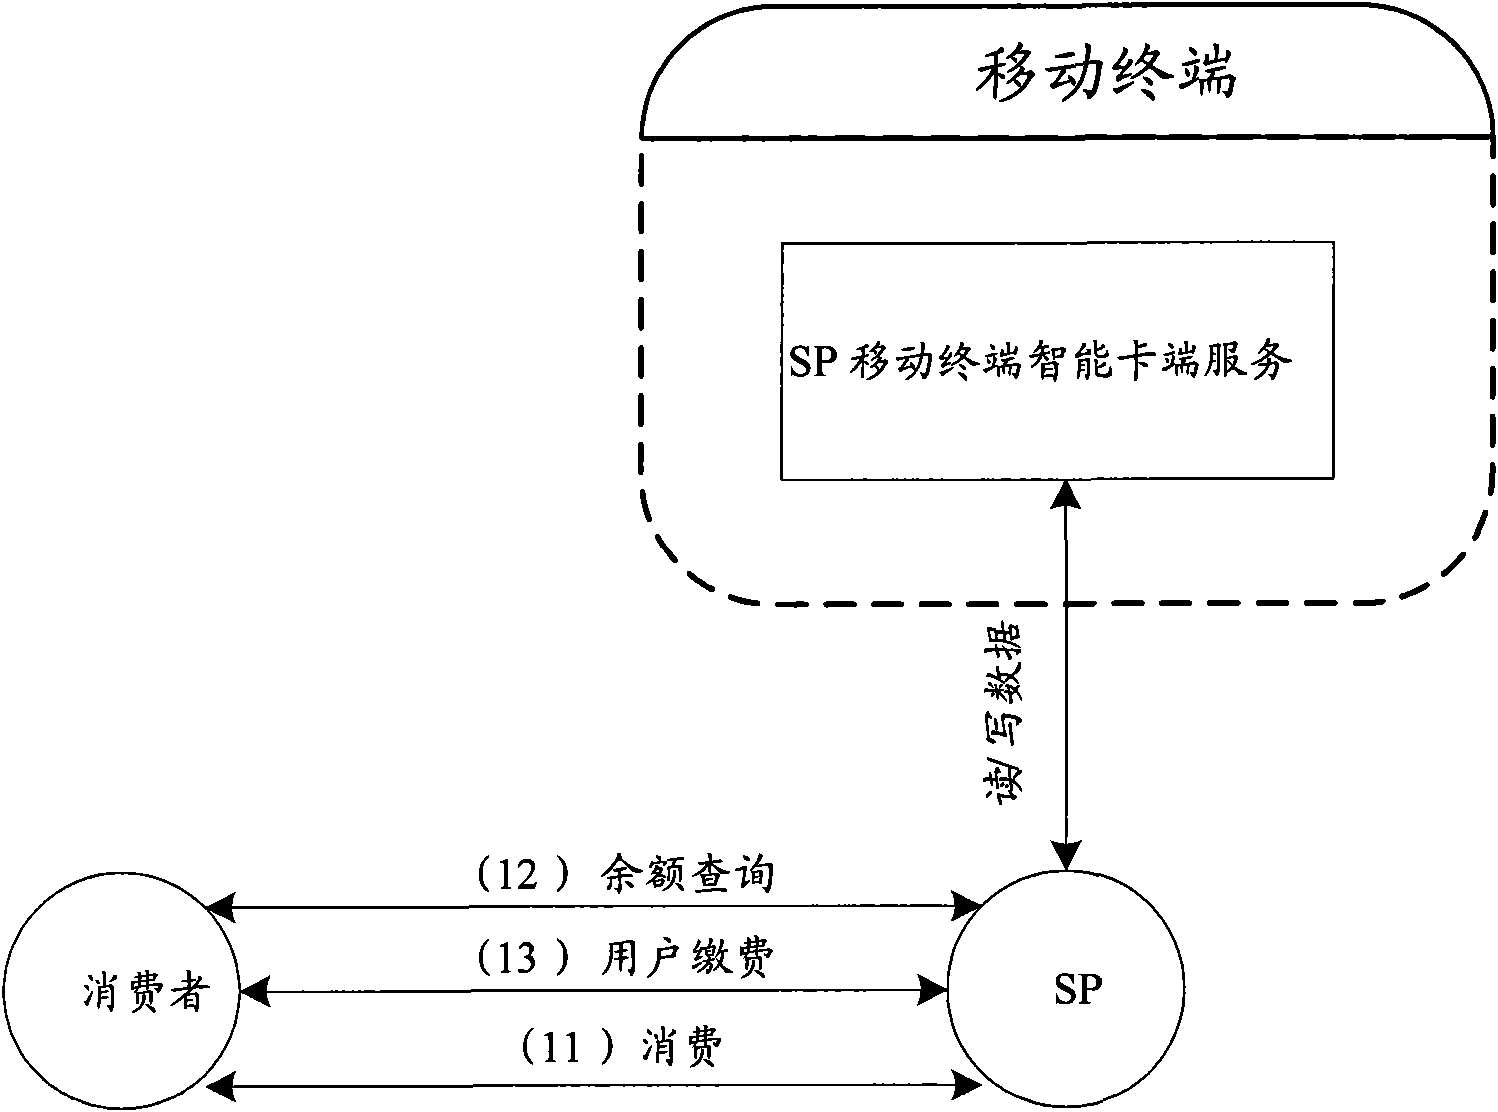 Terminal payment method and terminal based on near field communication